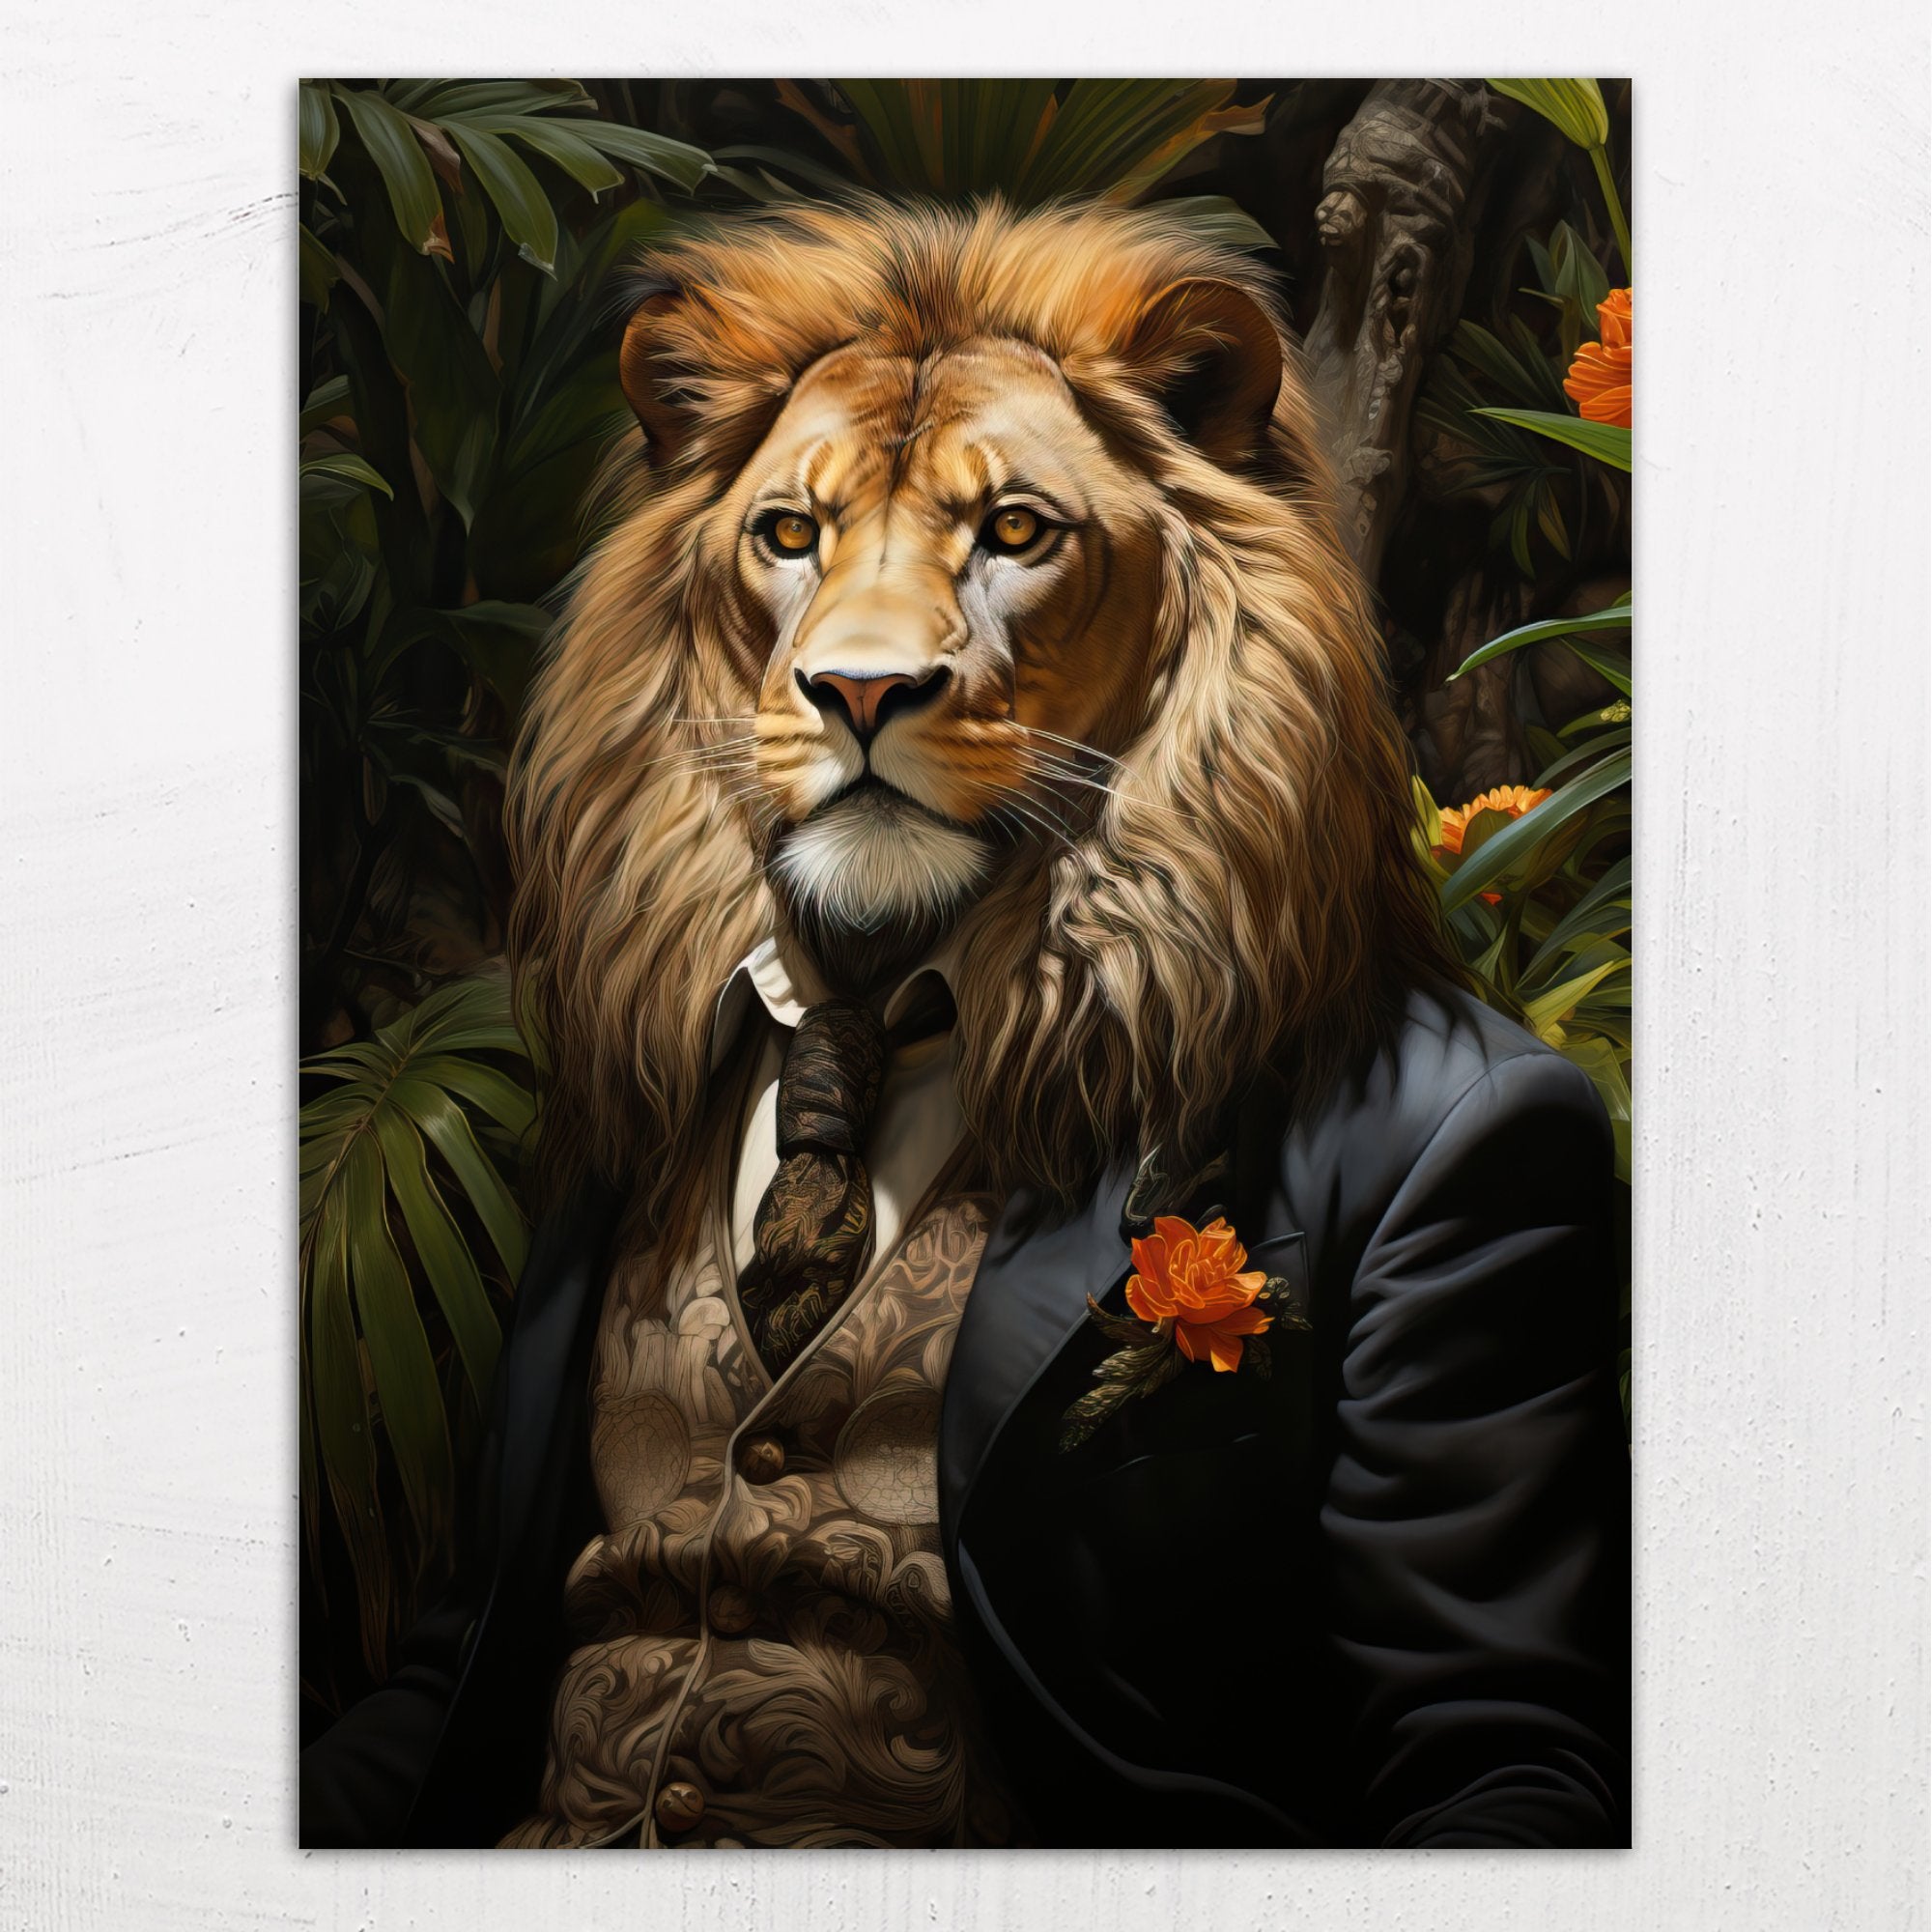 Animal Portraits - A Lion in Victorian Costume Surrounded by Jungle Plants